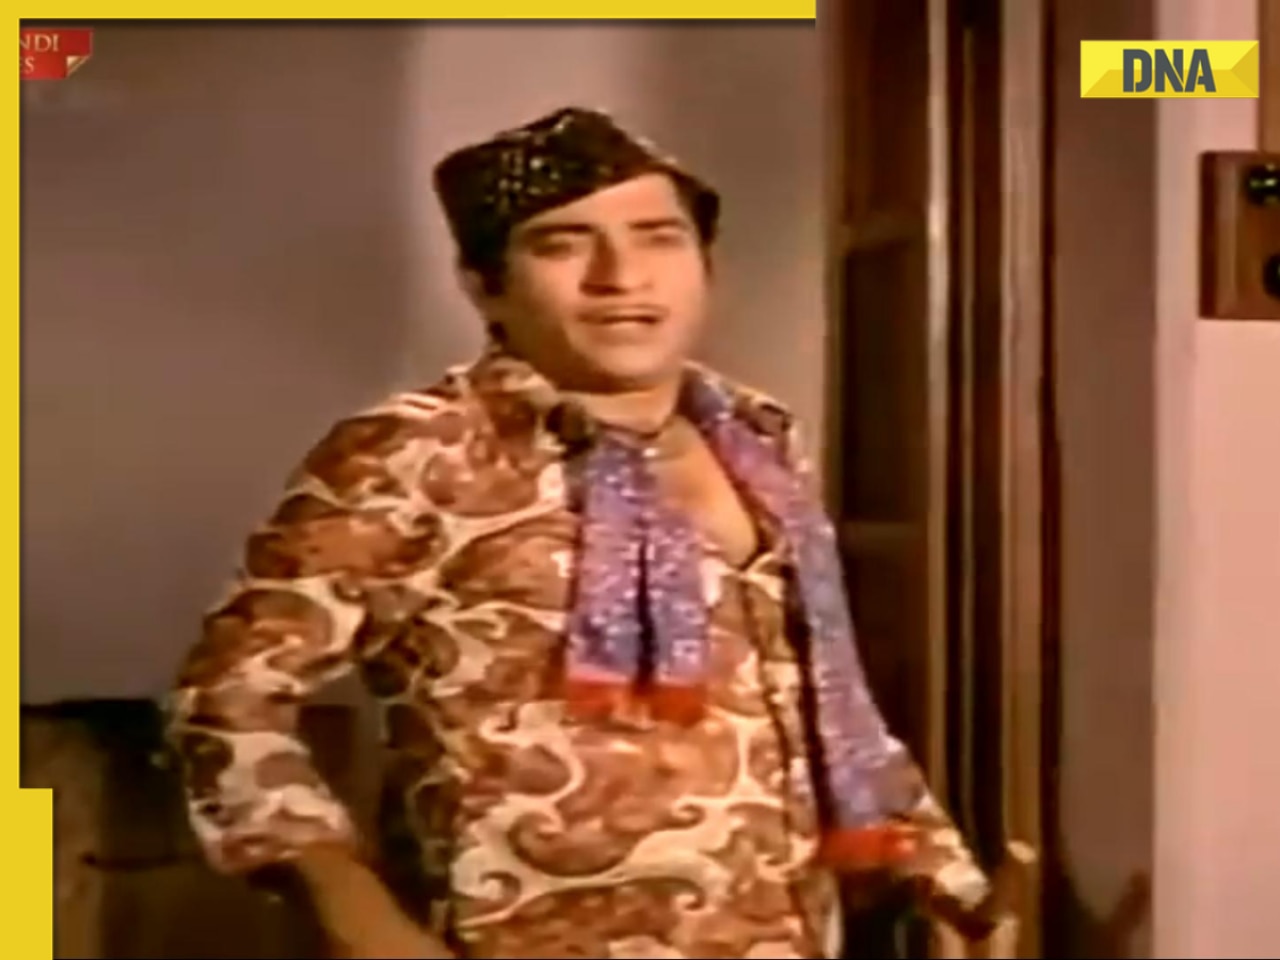 This Kapoor family actor worked as extra, side hero, did 50 films but had no lead role; even Raj Kapoor never cast him